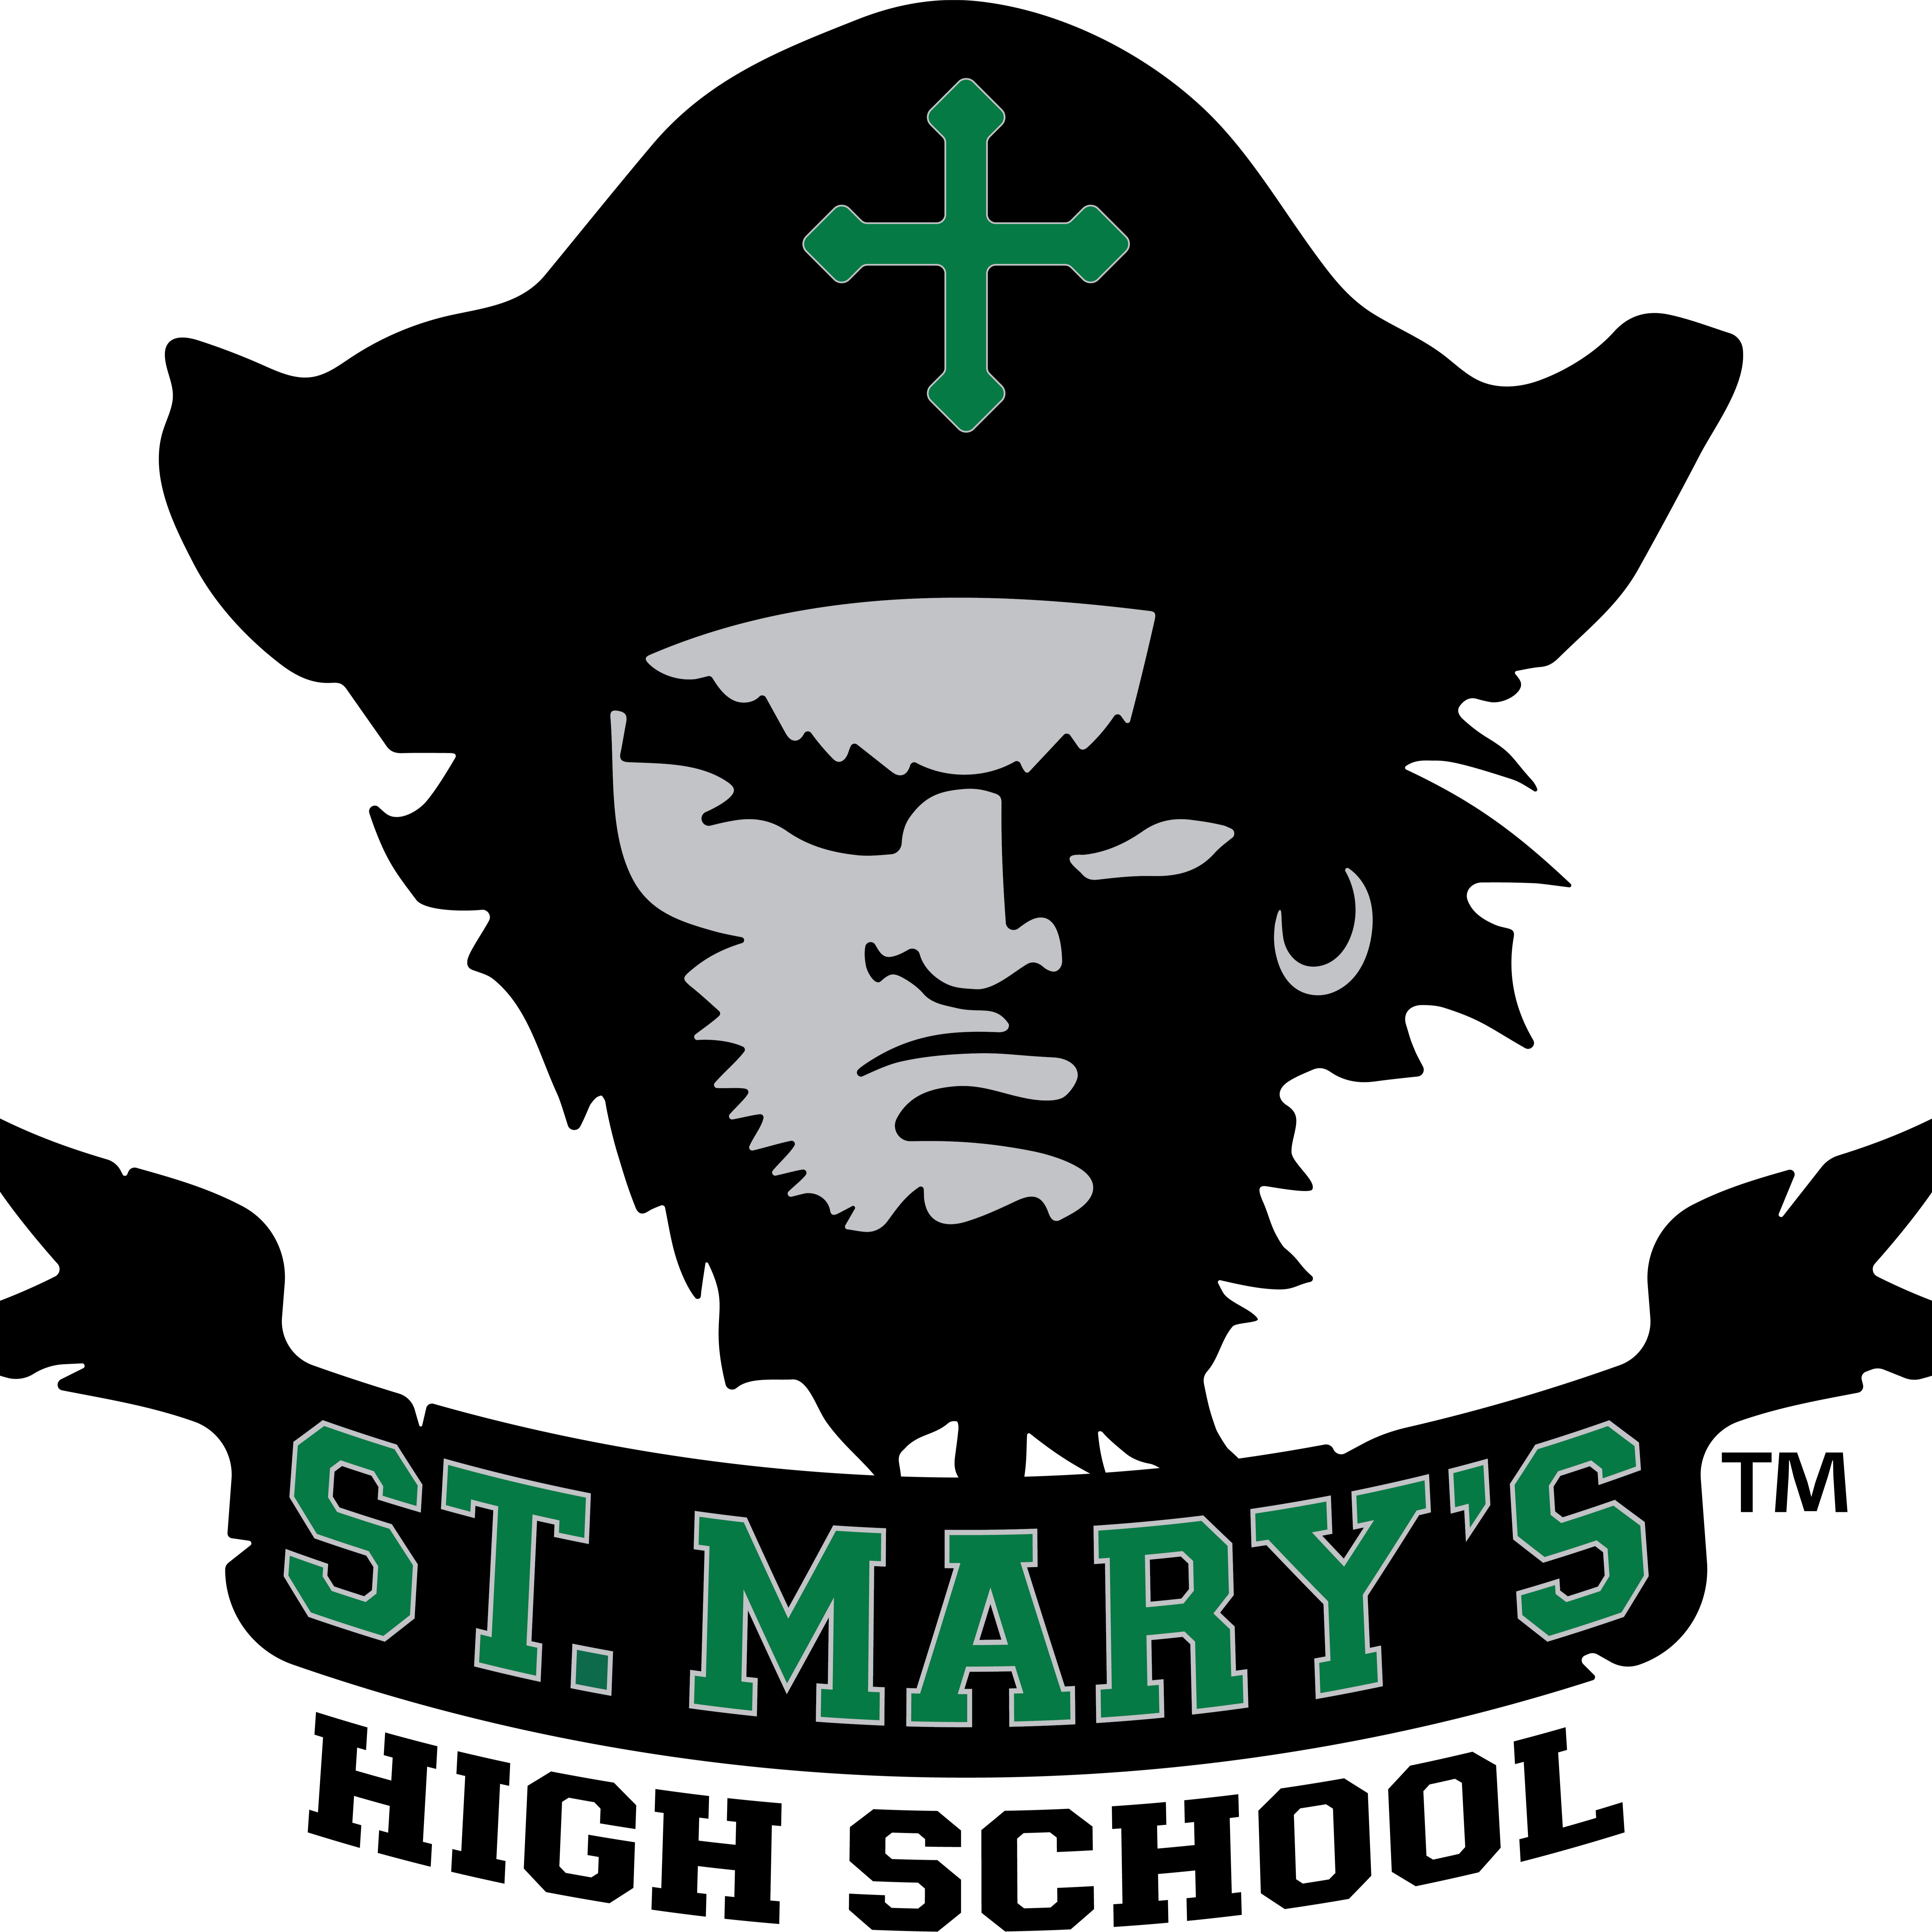 St. Mary's High School Rusty the Pirate mascot